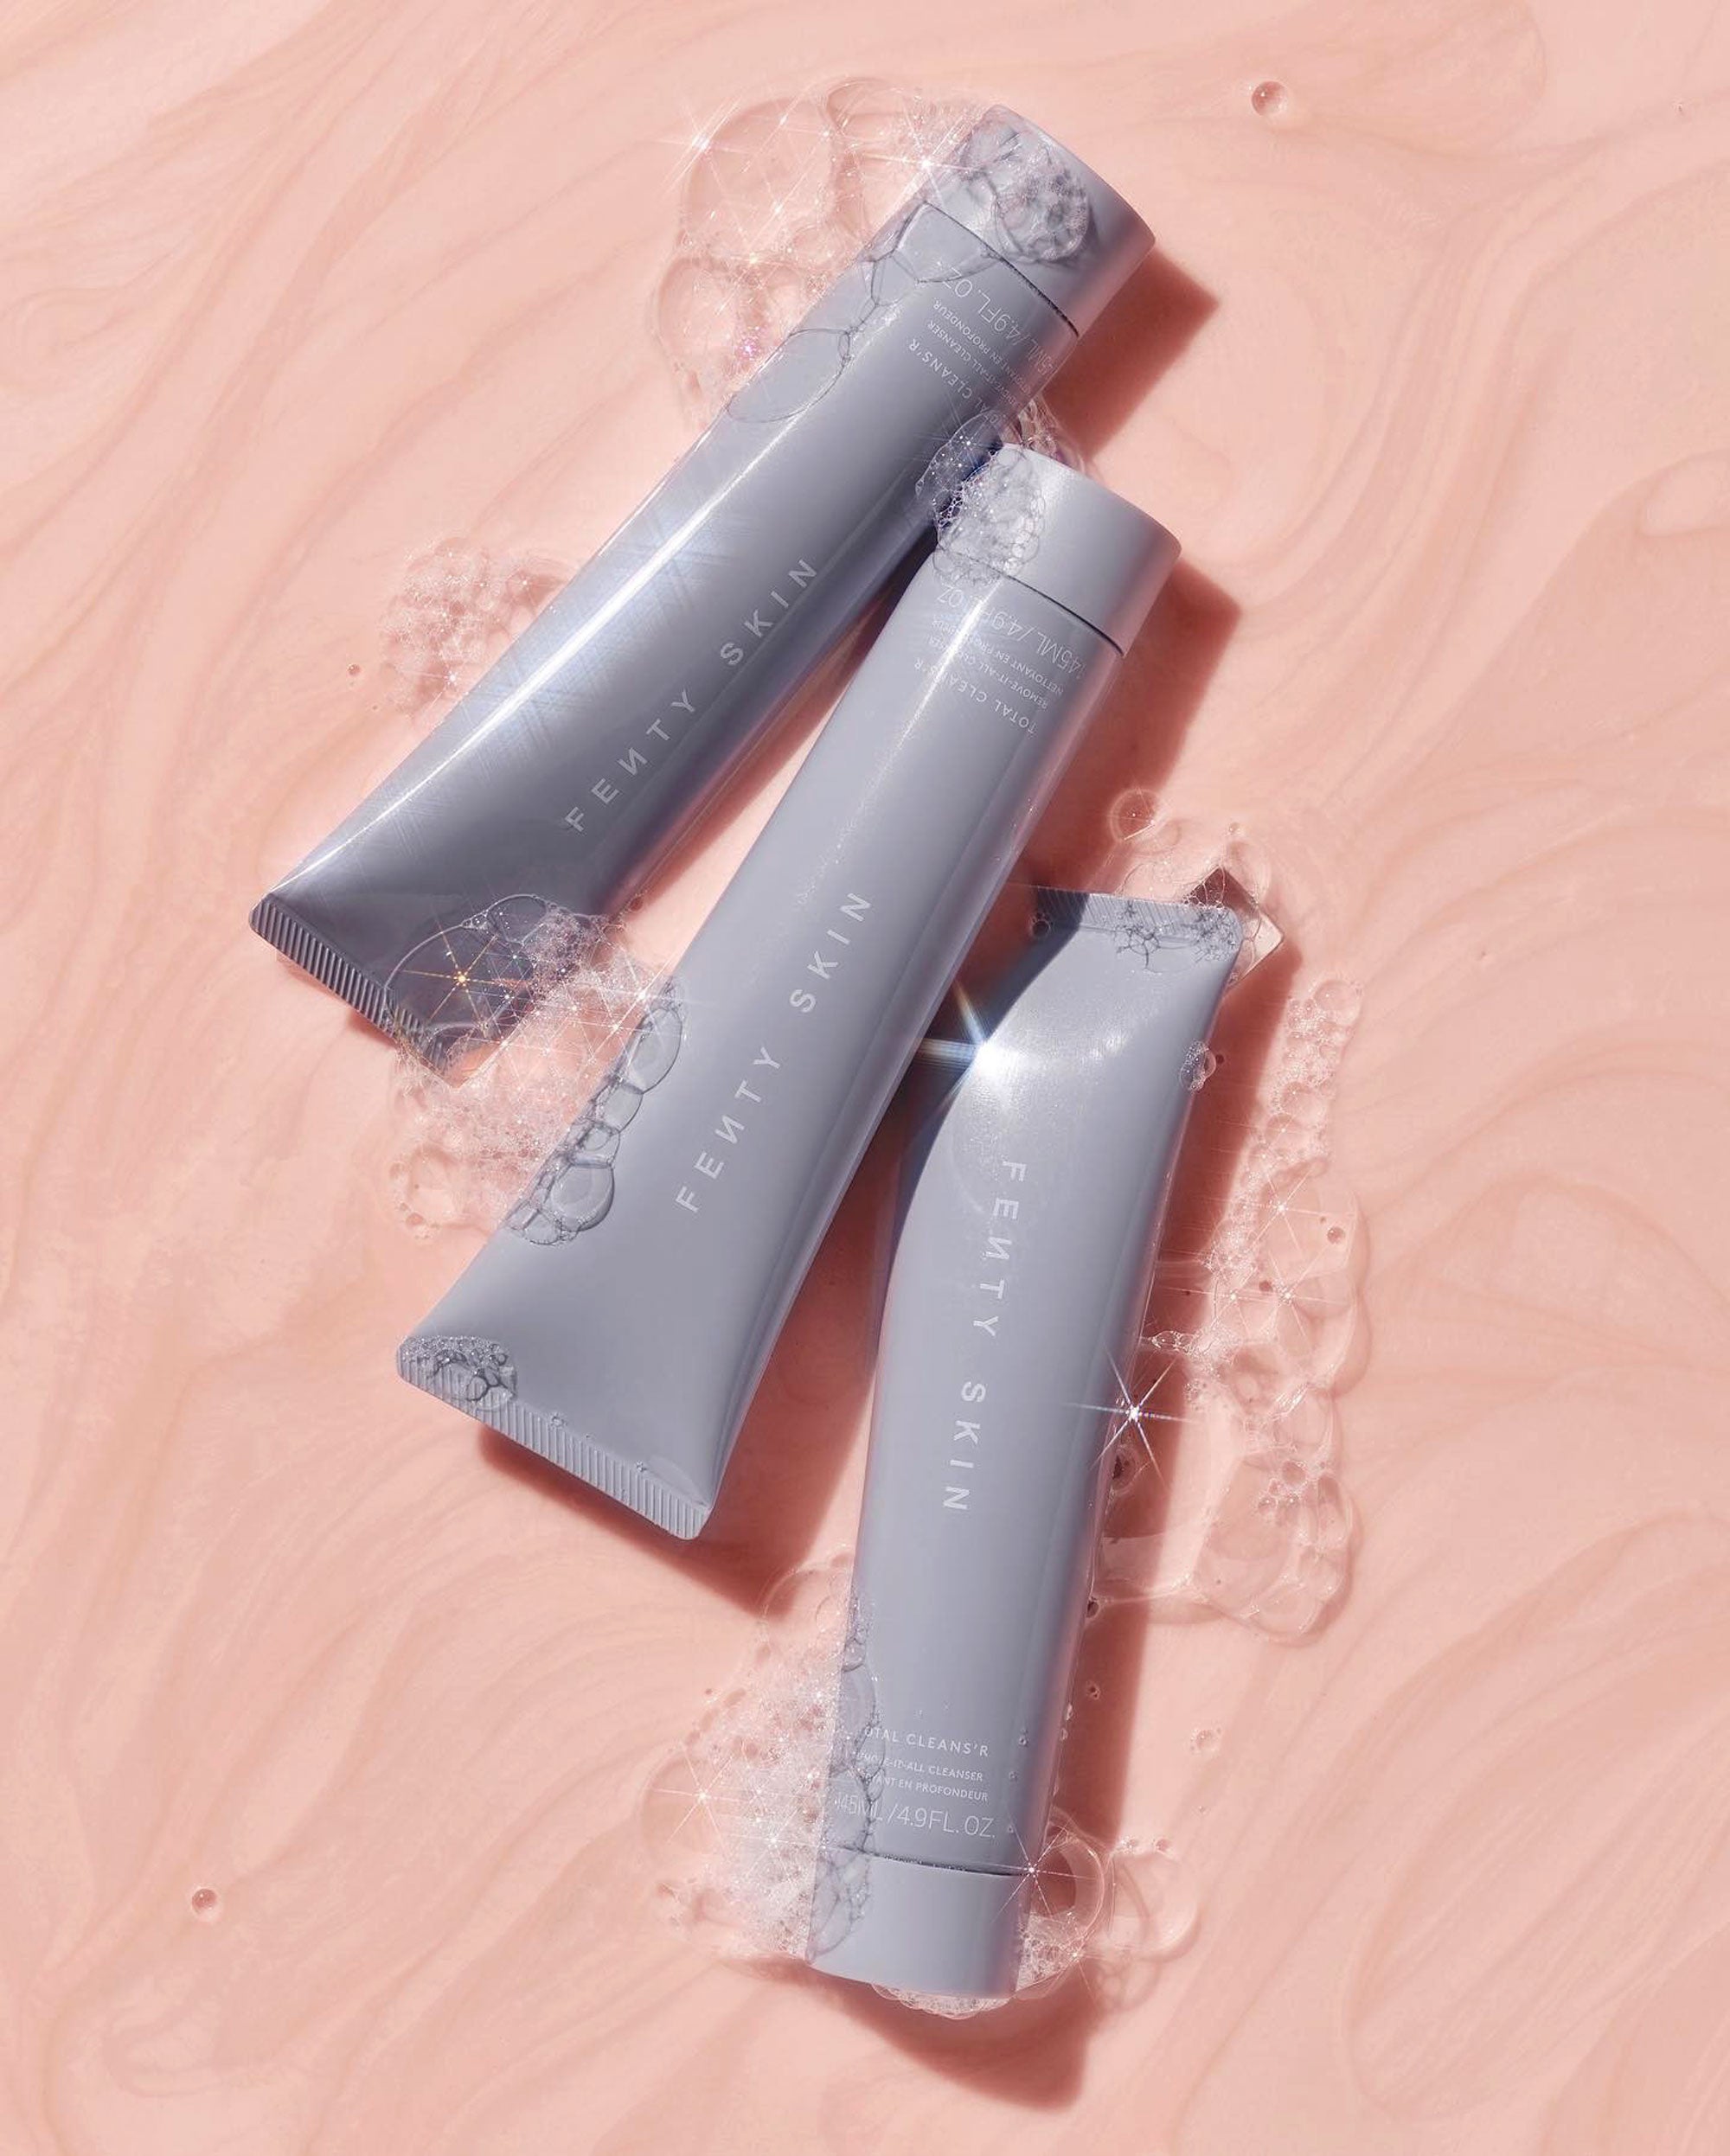 Get your hands on Fenty Beauty + Rihanna. It's selling out fast.